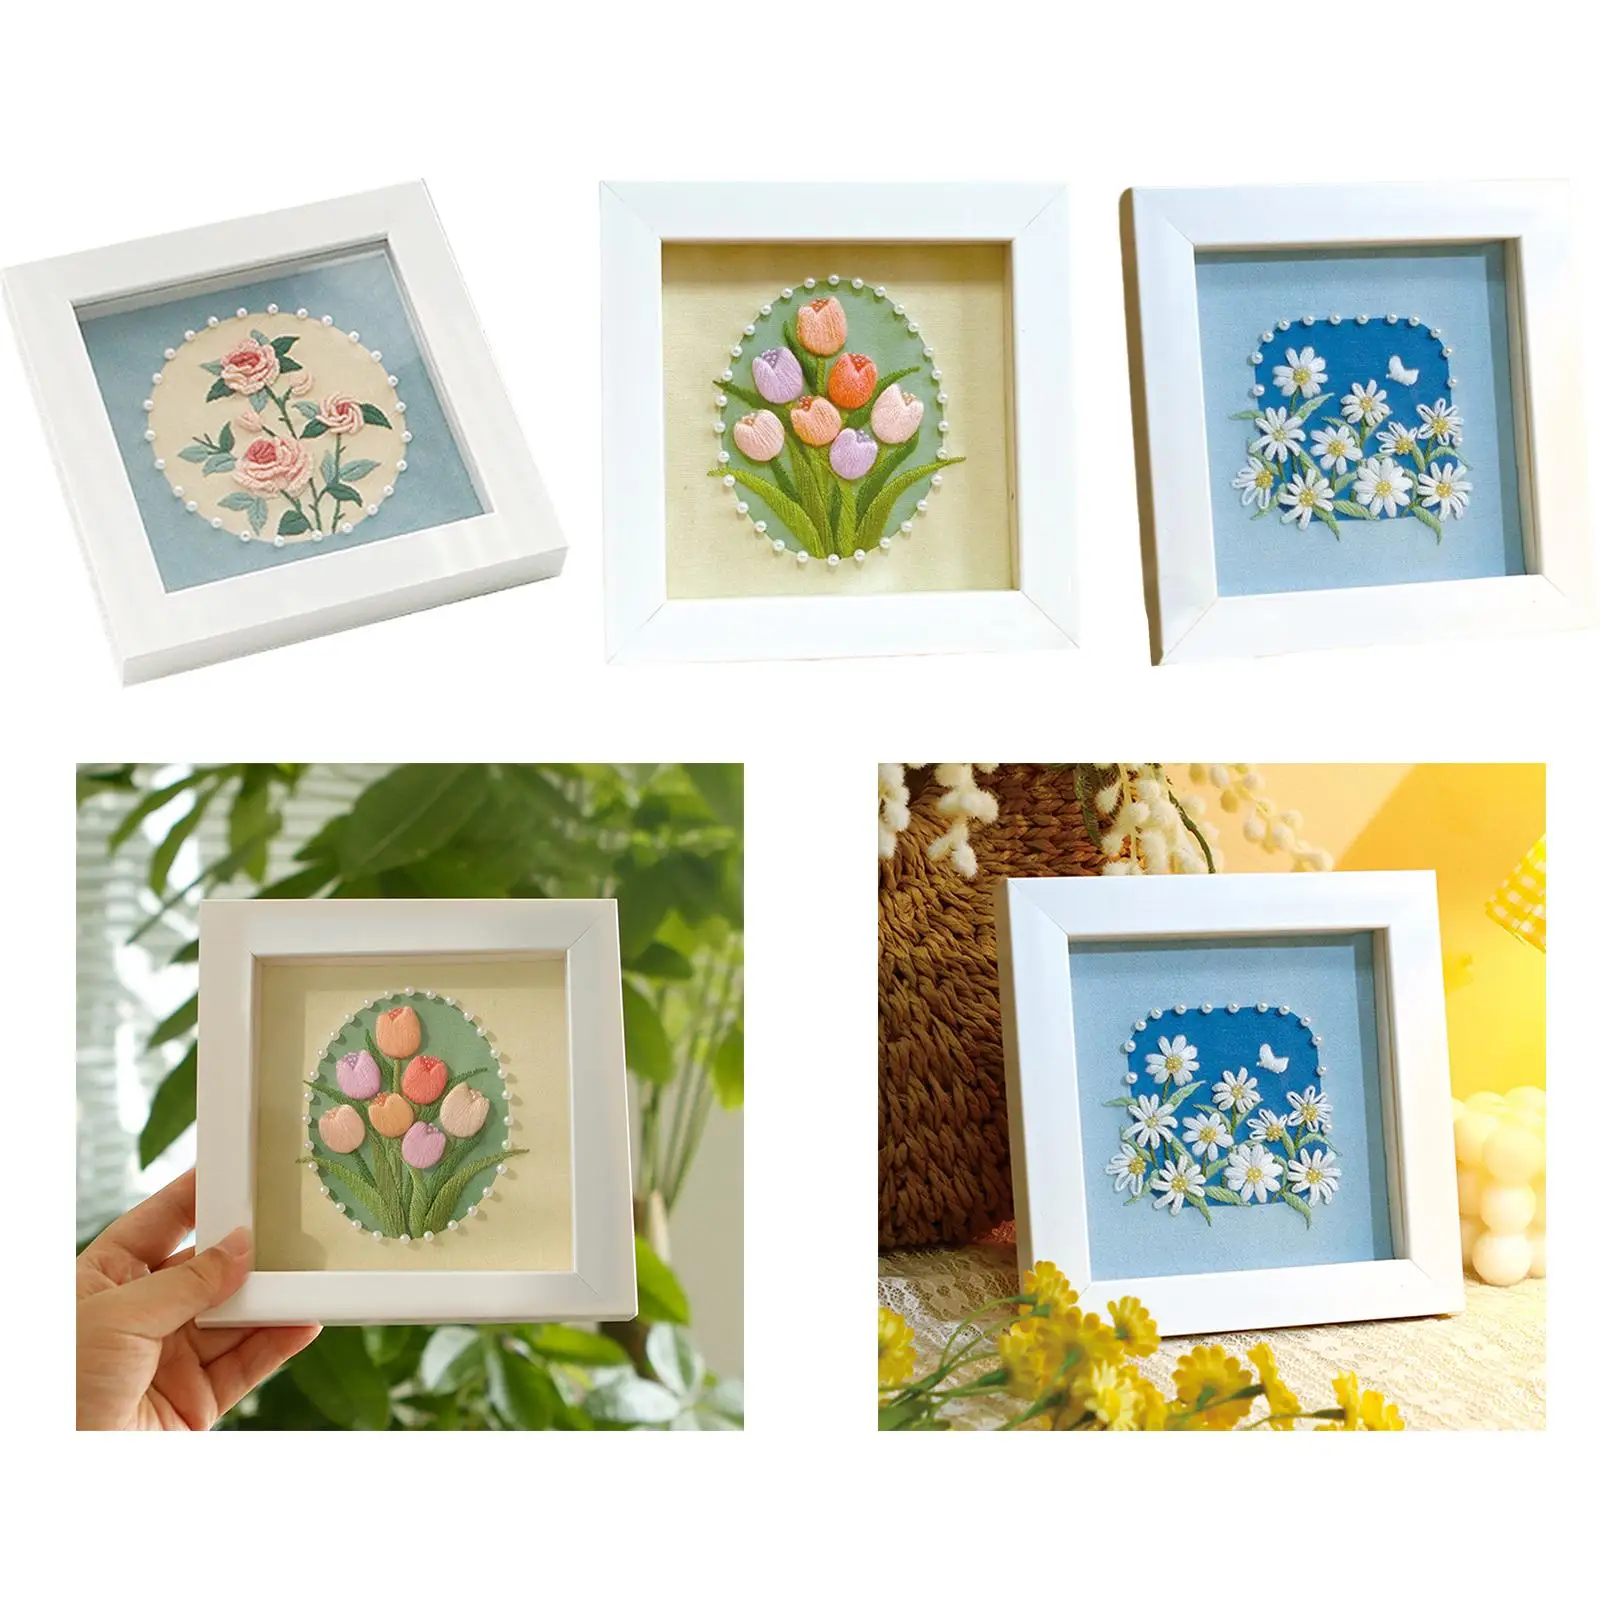 Embroidery Kits Full Embroidery Starter Kits DIY Home Decoration